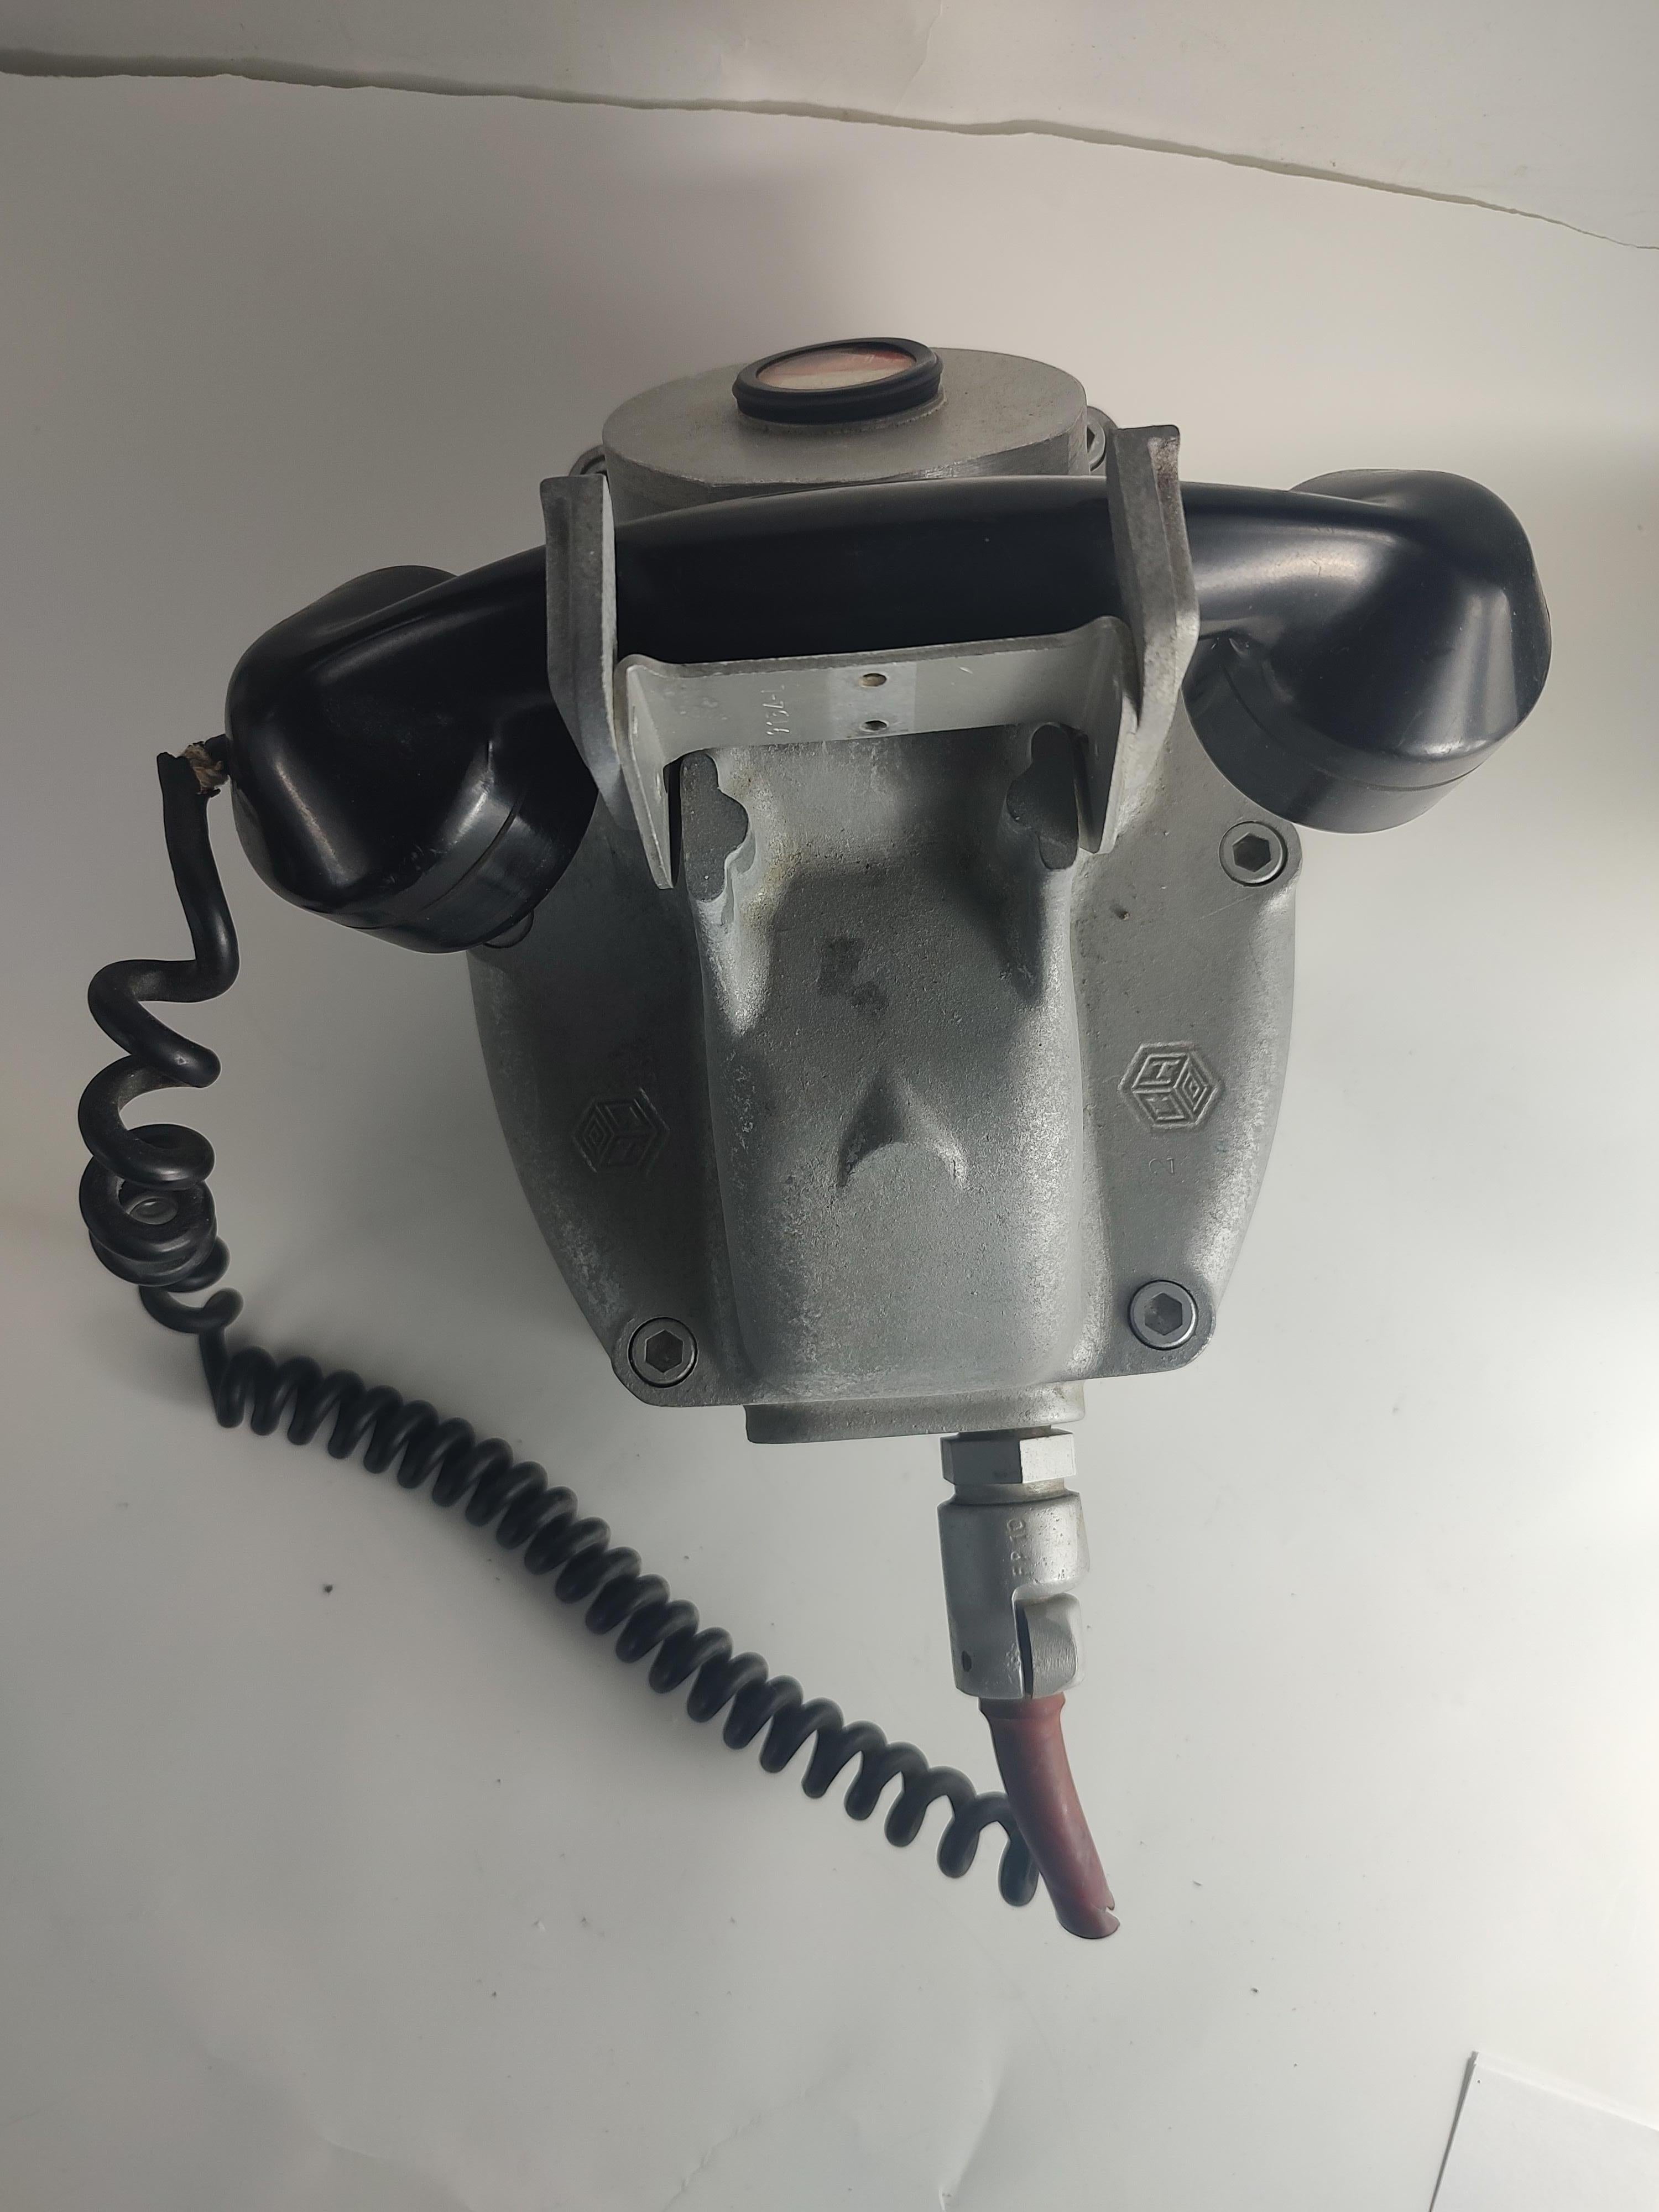 Mid-20th Century Mid-Century Modern Industrial Explosion Proof Phone by Crouse-Hinds C1955 For Sale